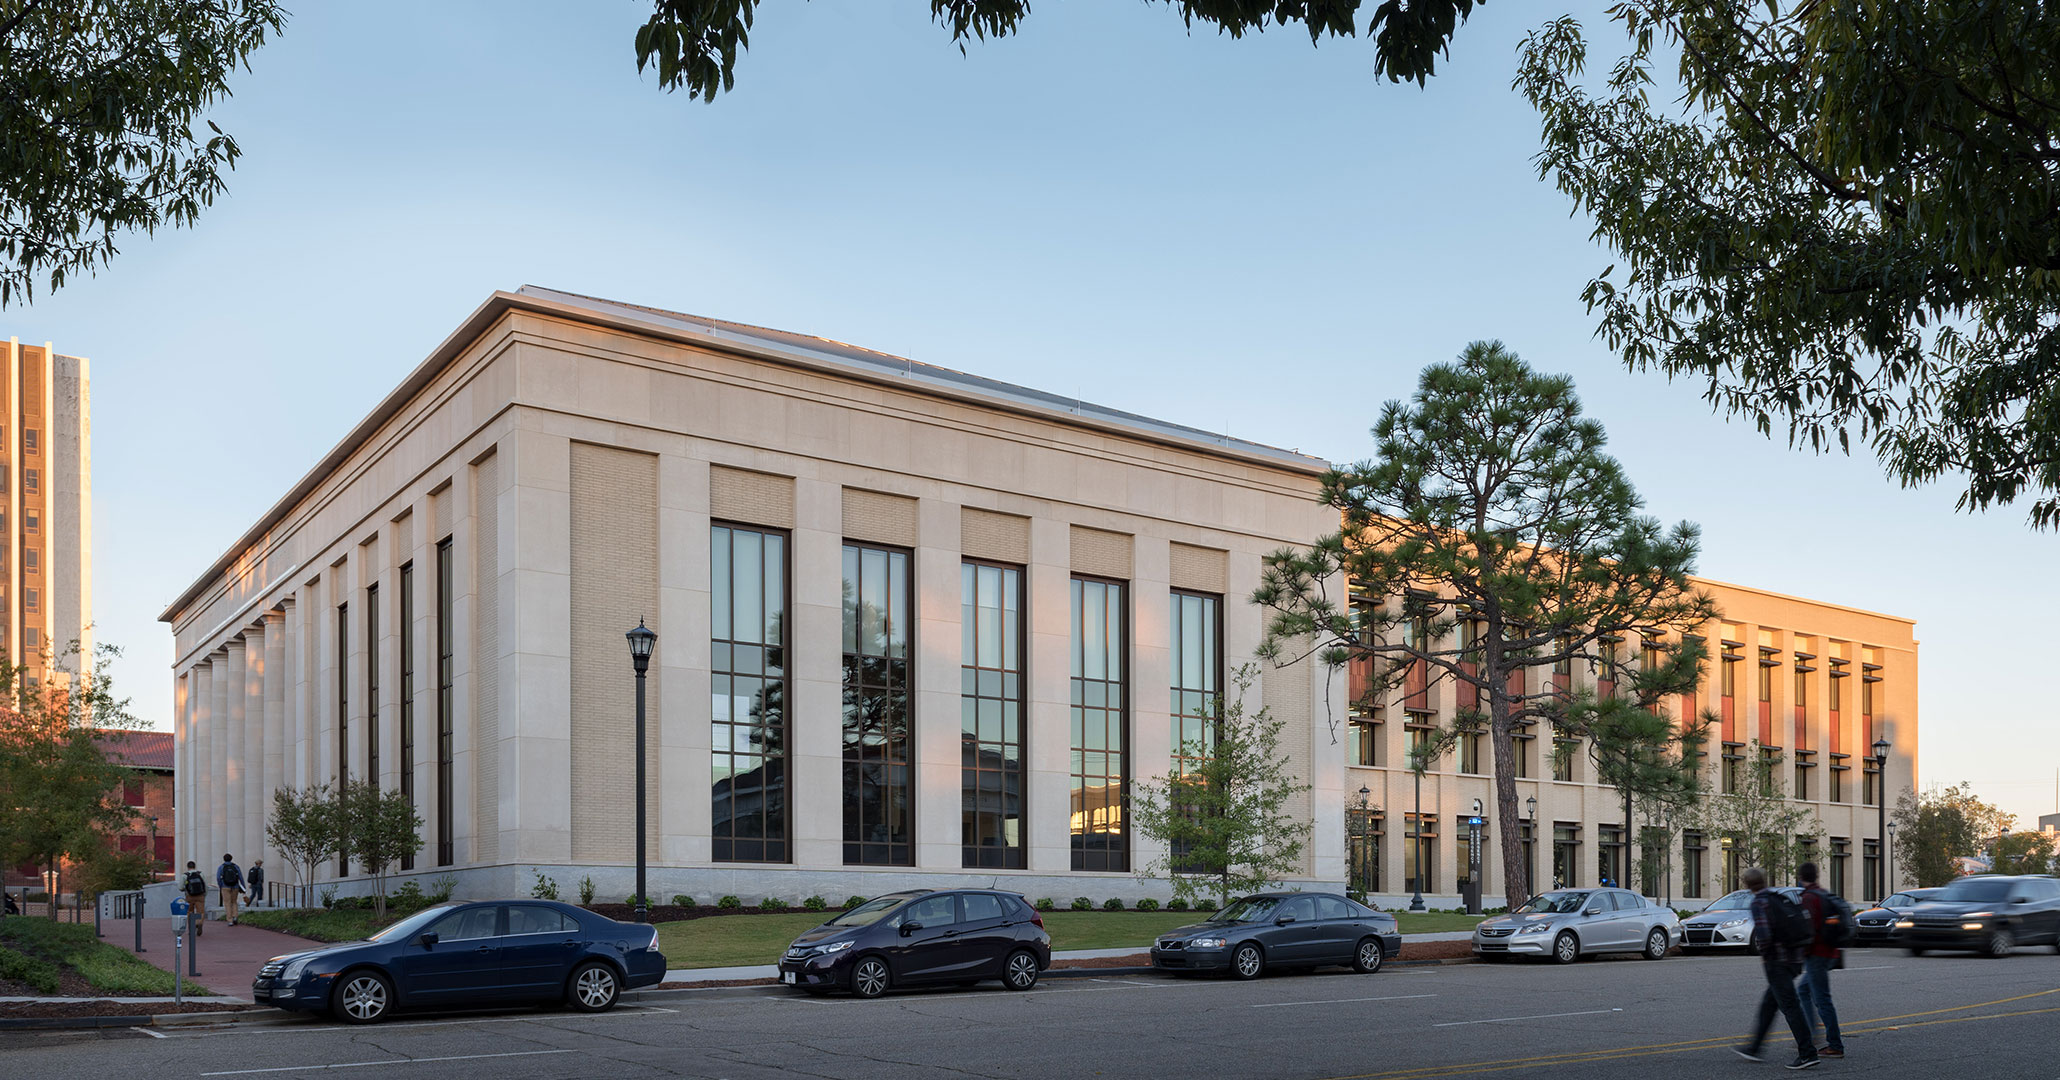 The University of South Carolina worked with Boudreaux architects to design the new Law School on Gervais and Bull Street.